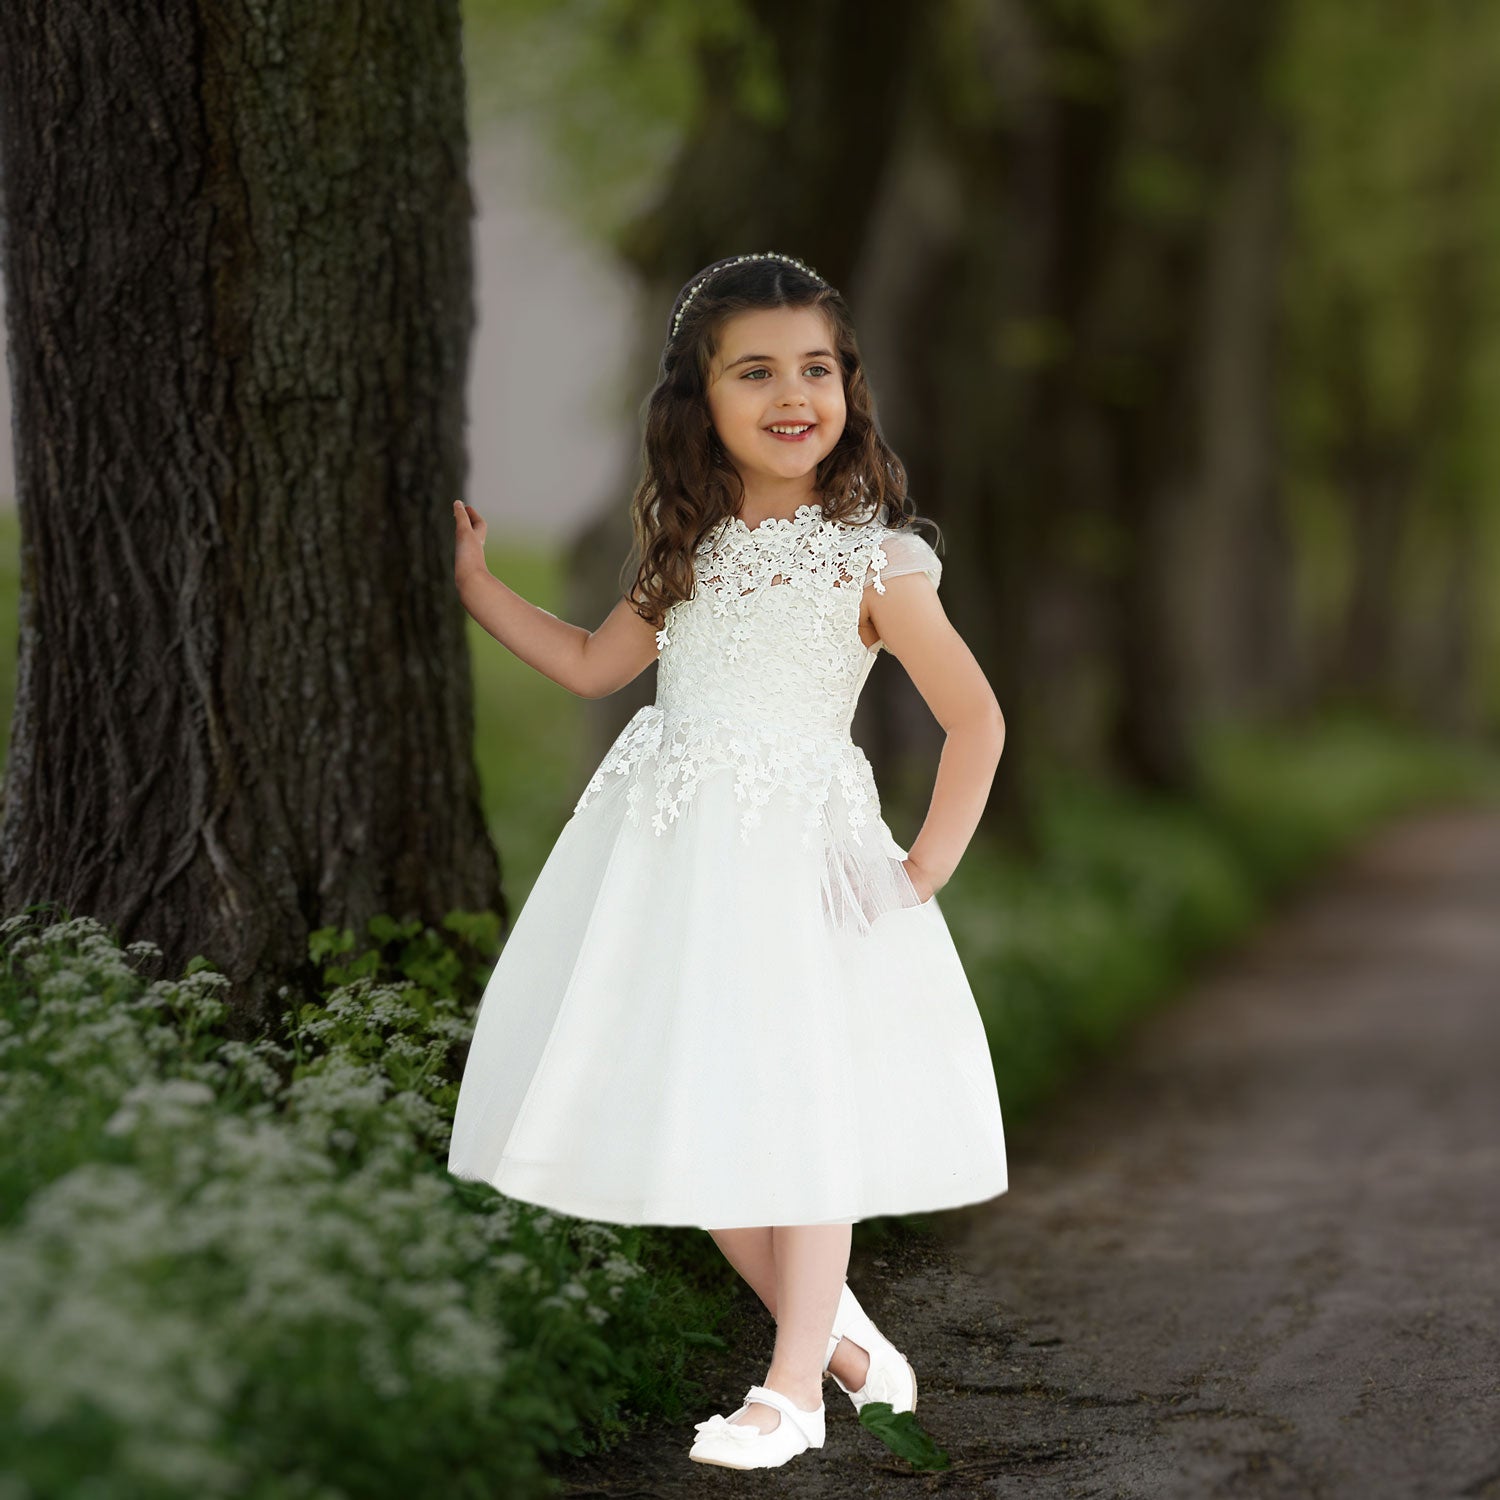 DRESS YOUR LITTLE PRINCESS IN FASHIONABLE GIRLS CLOTHING – Sara Dresses